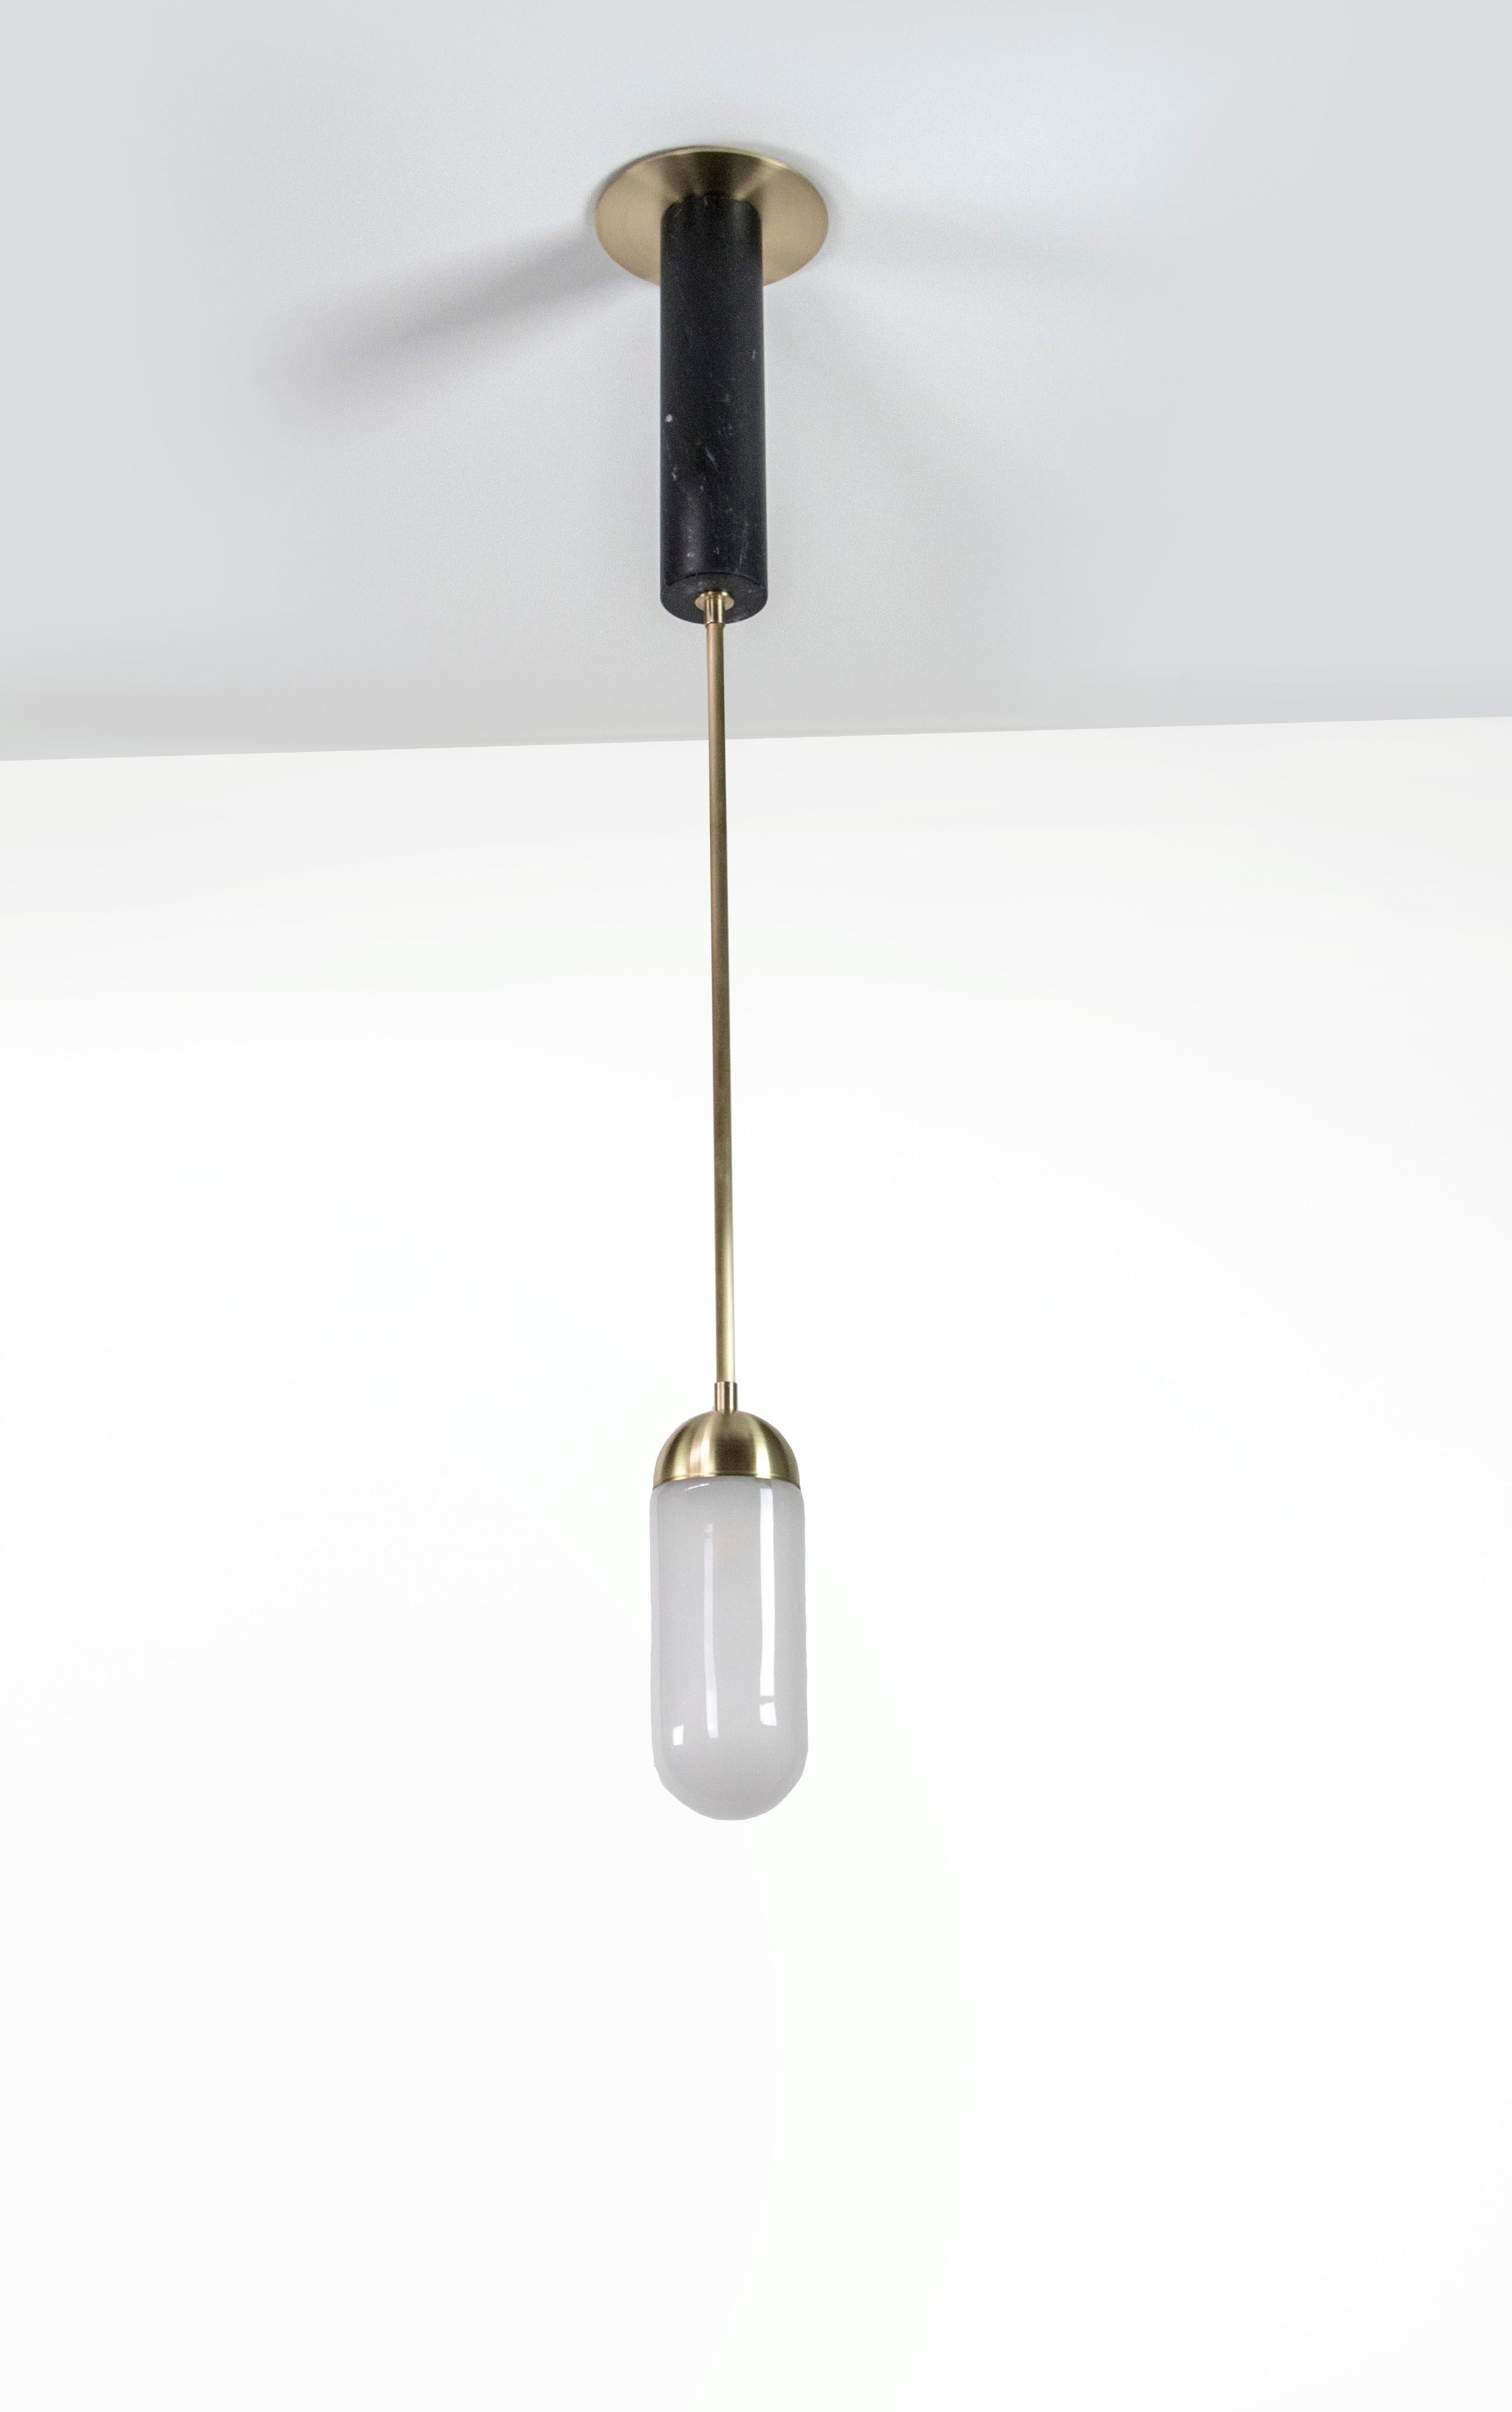 Meridian Single, Capsule Contemporary Pendant, Handblown Glass, Brass, Marble For Sale 4